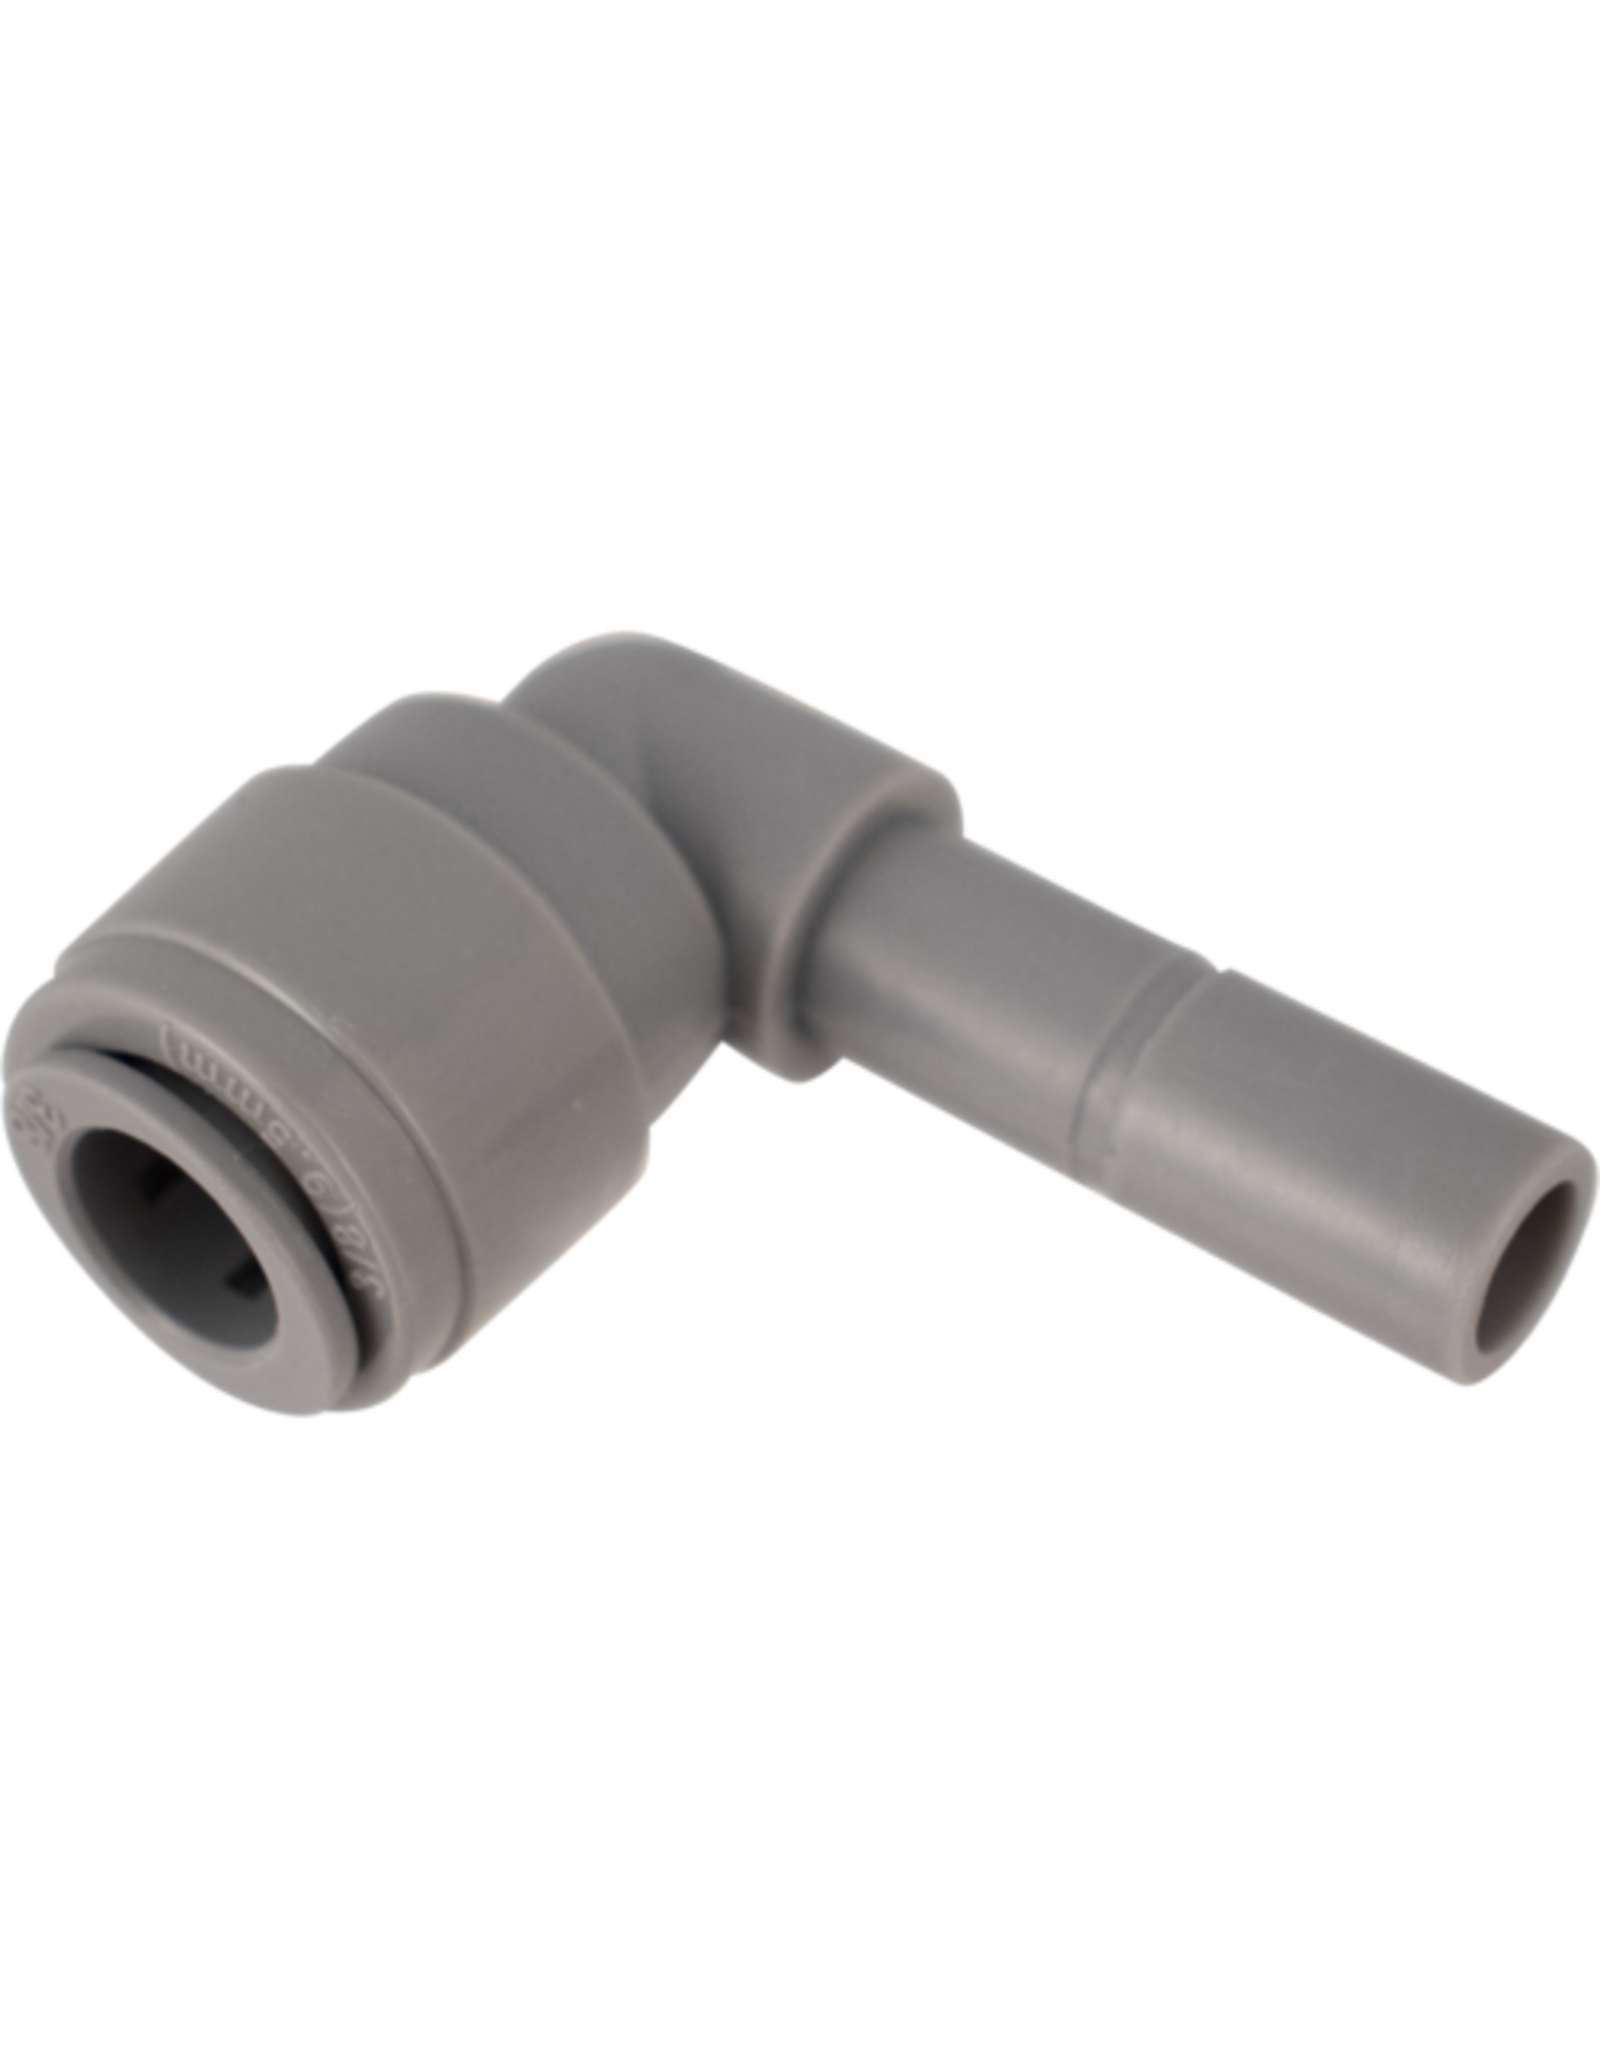 KegLand Duotight Push-In Fitting - 9.5 mm (3/8 in.) x 9.5 mm (3/8 in.) Male Elbow